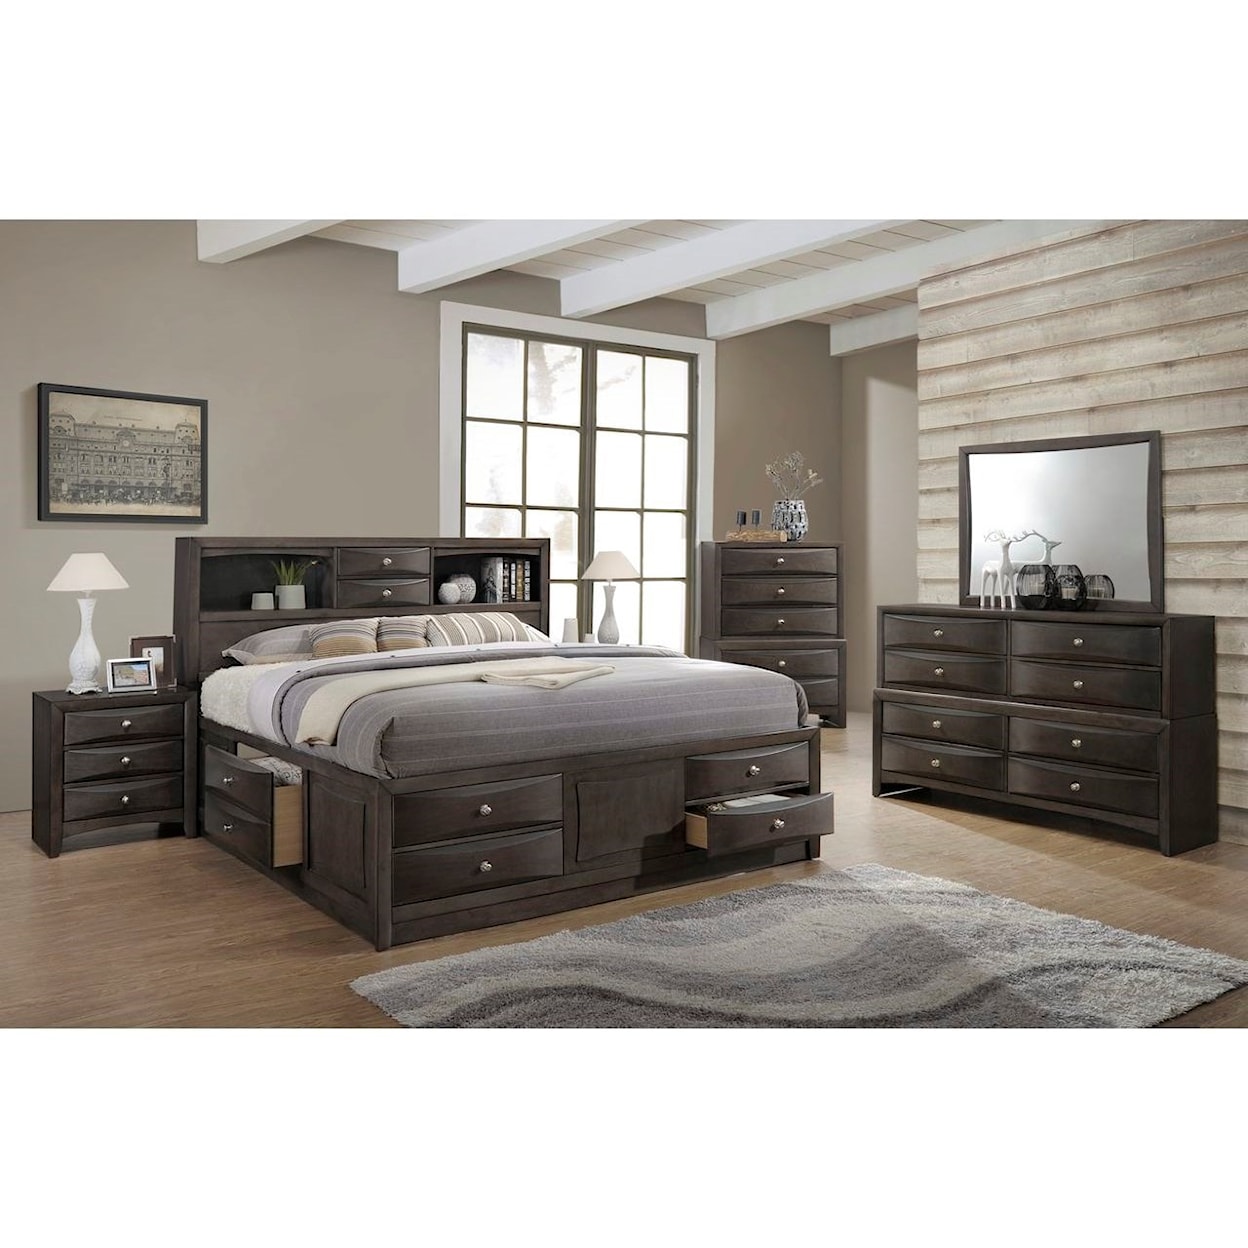 Lifestyle Todd Gray Queen Bedroom Group